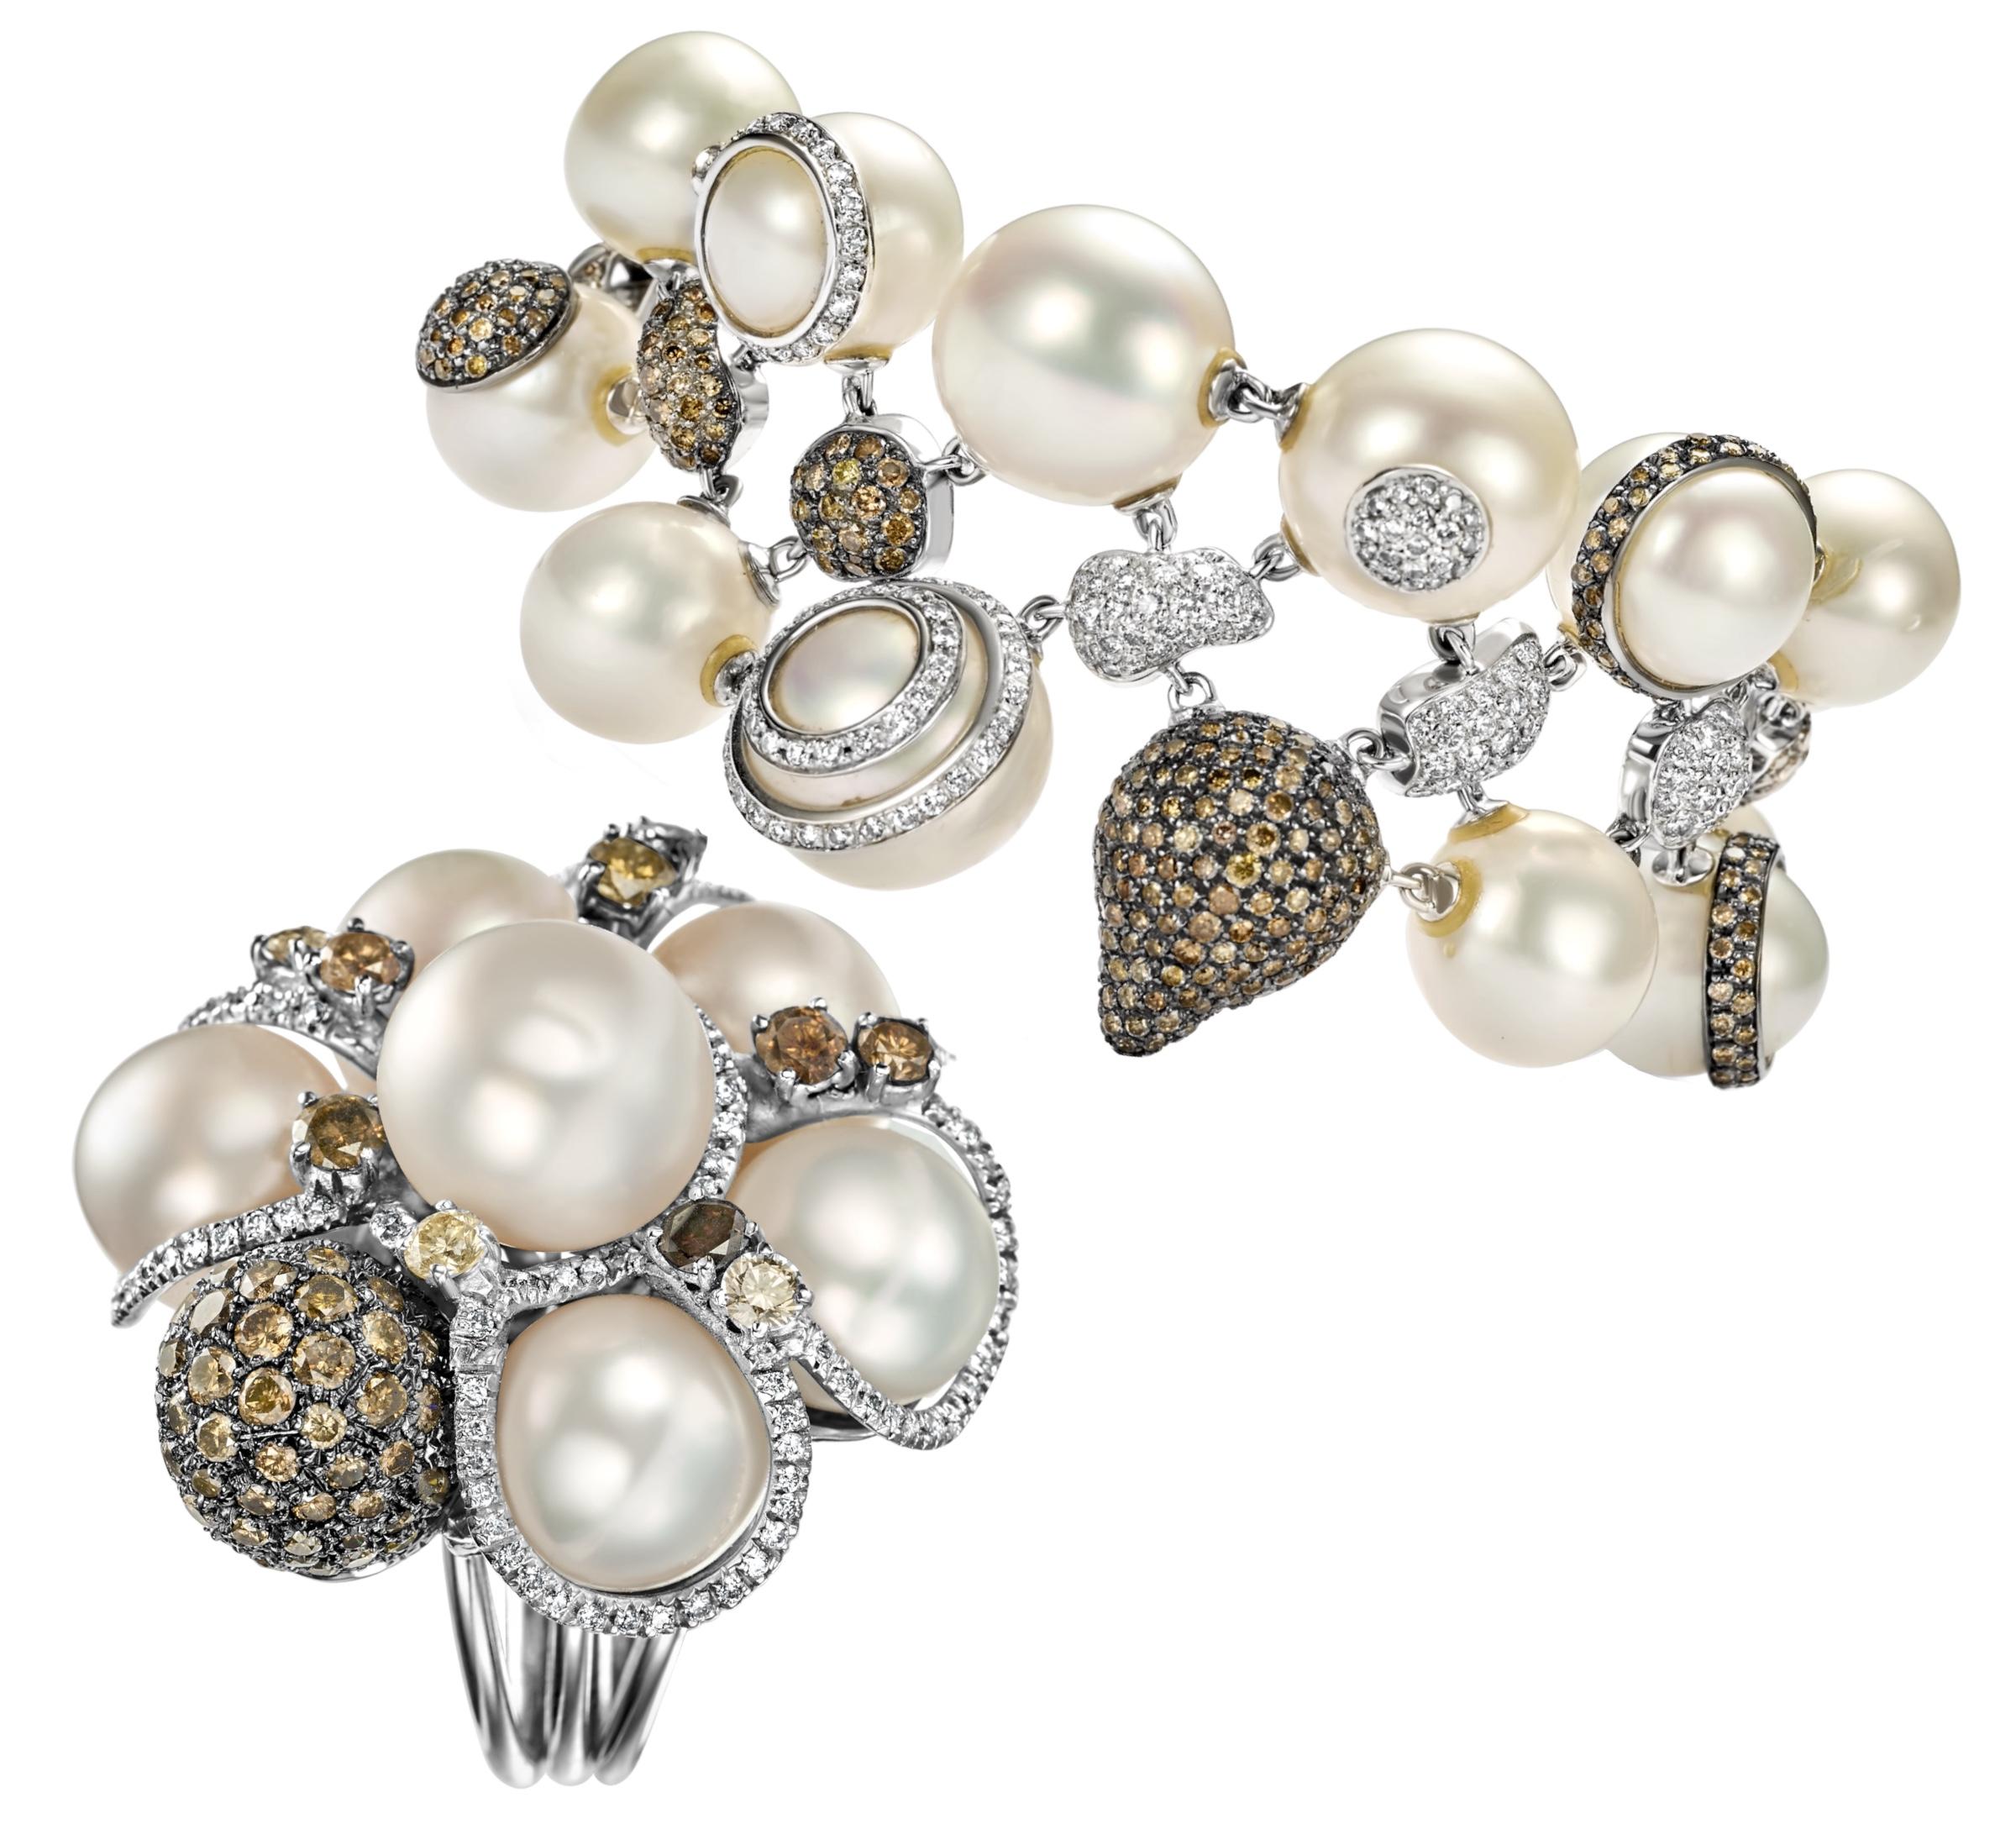 18kt White Gold Bracelet 12.6ct White & Cognac Diamonds Pearl Has Matching Ring For Sale 9